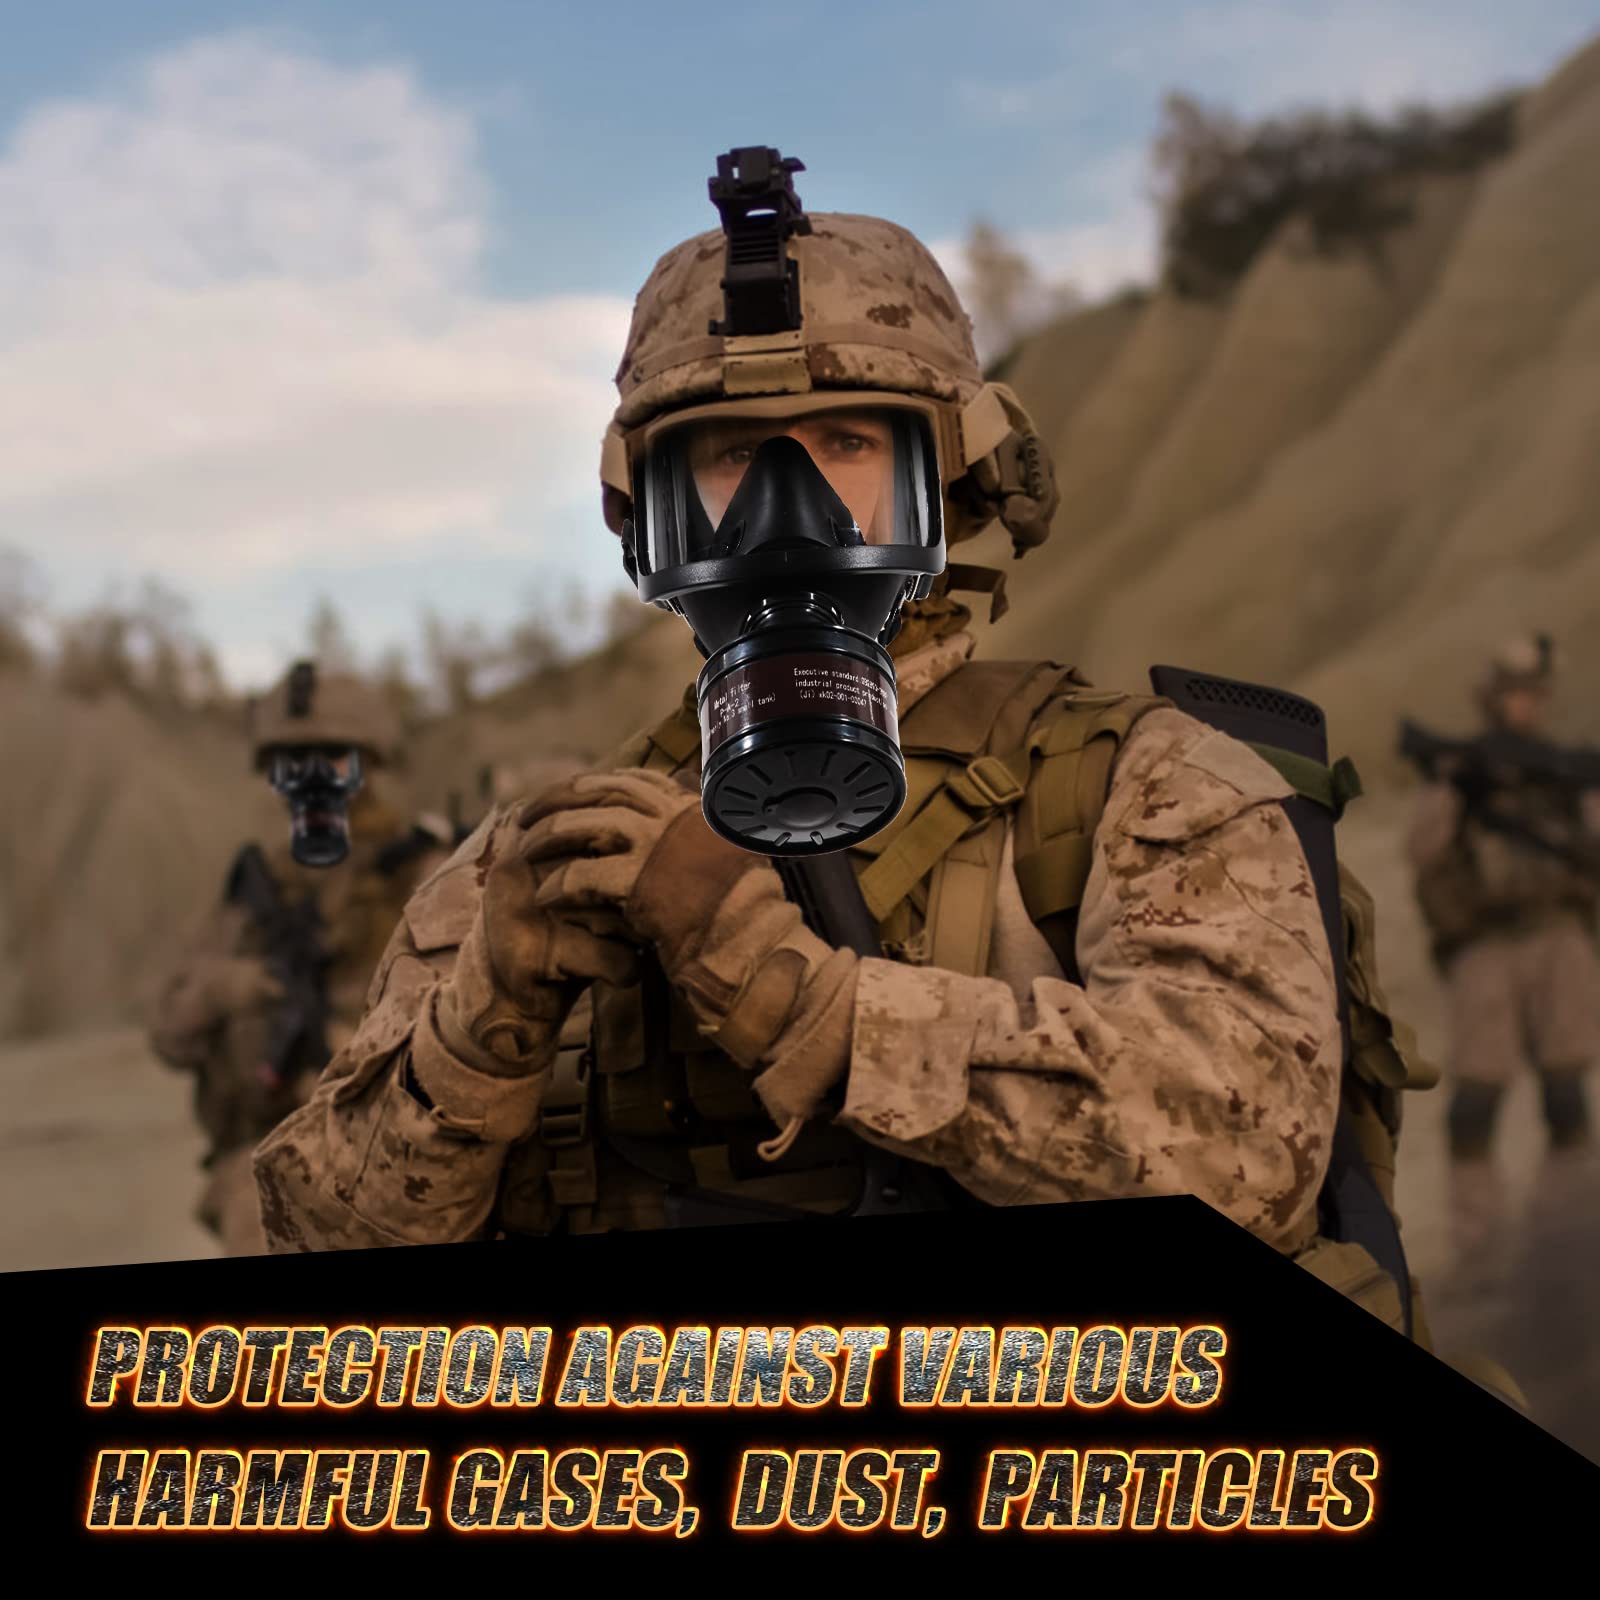 HANUU Gas Masks Survival Nuclear and Chemical, Gas Mask Military Tactical Respirator, Full Face Respirator Mask with 40mm Activated Carbon Filter for Dust, Vapors, Chemicals